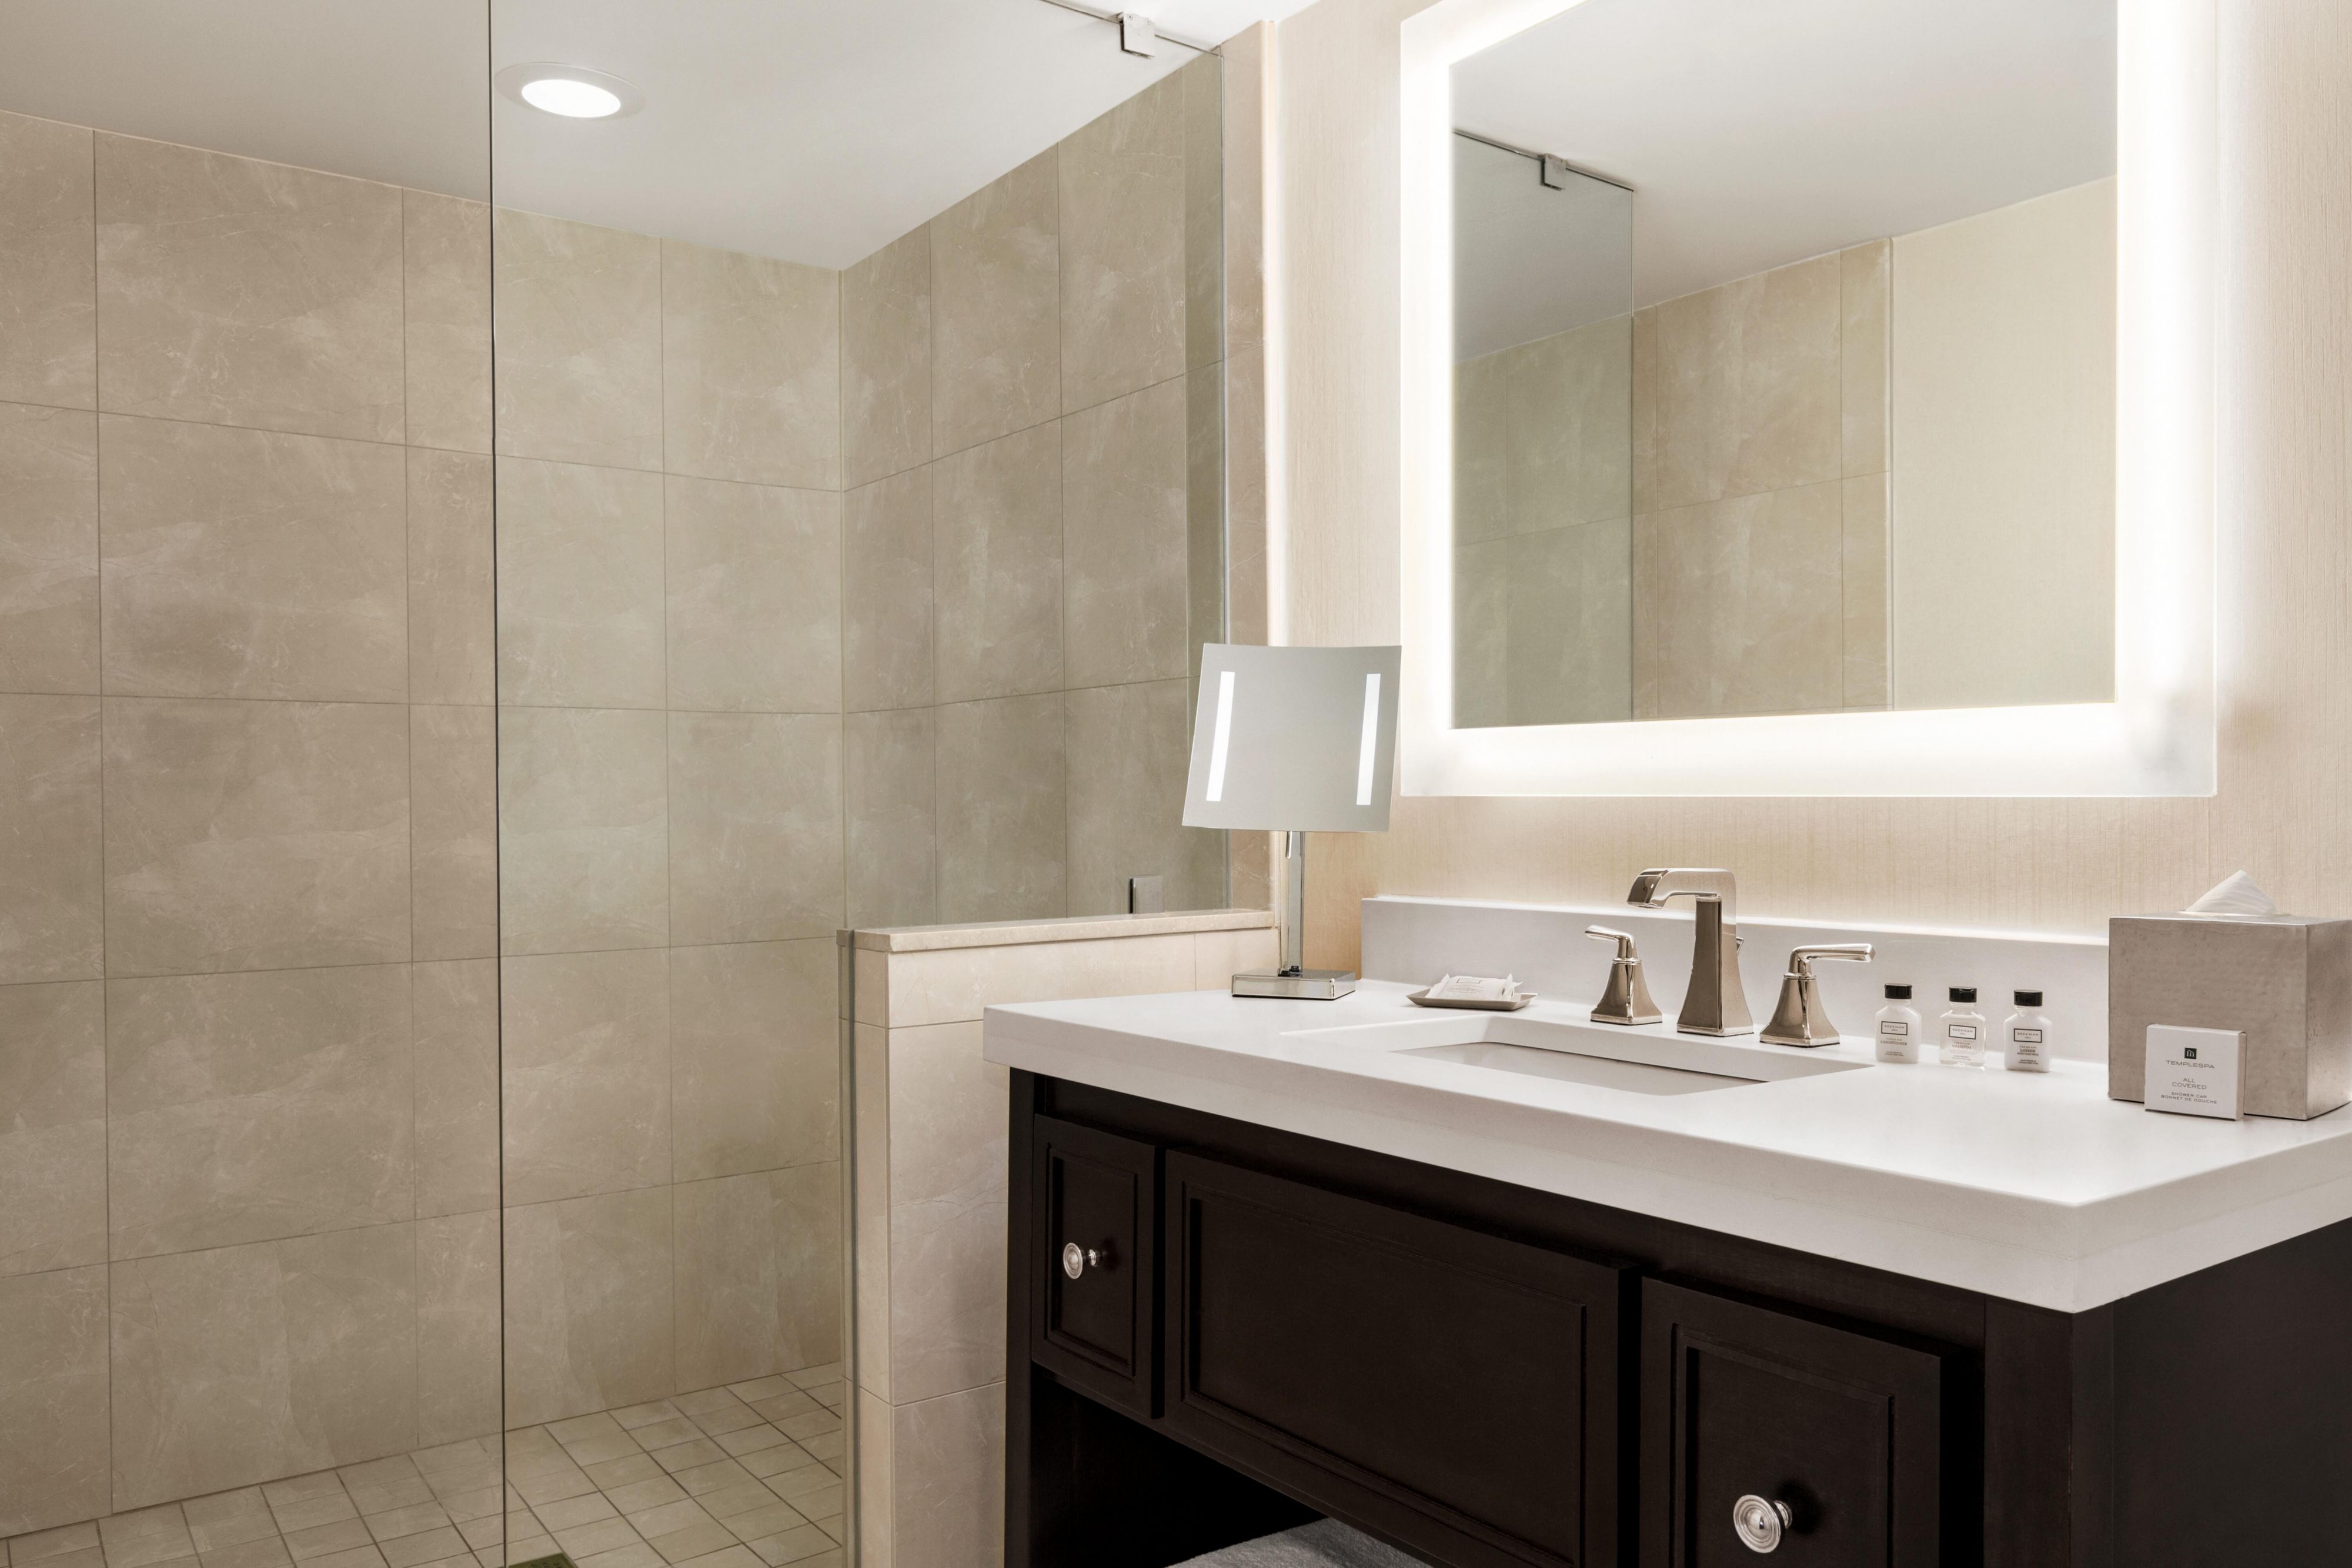 Our King Bedroom Suite bathroom is spacious and well light.